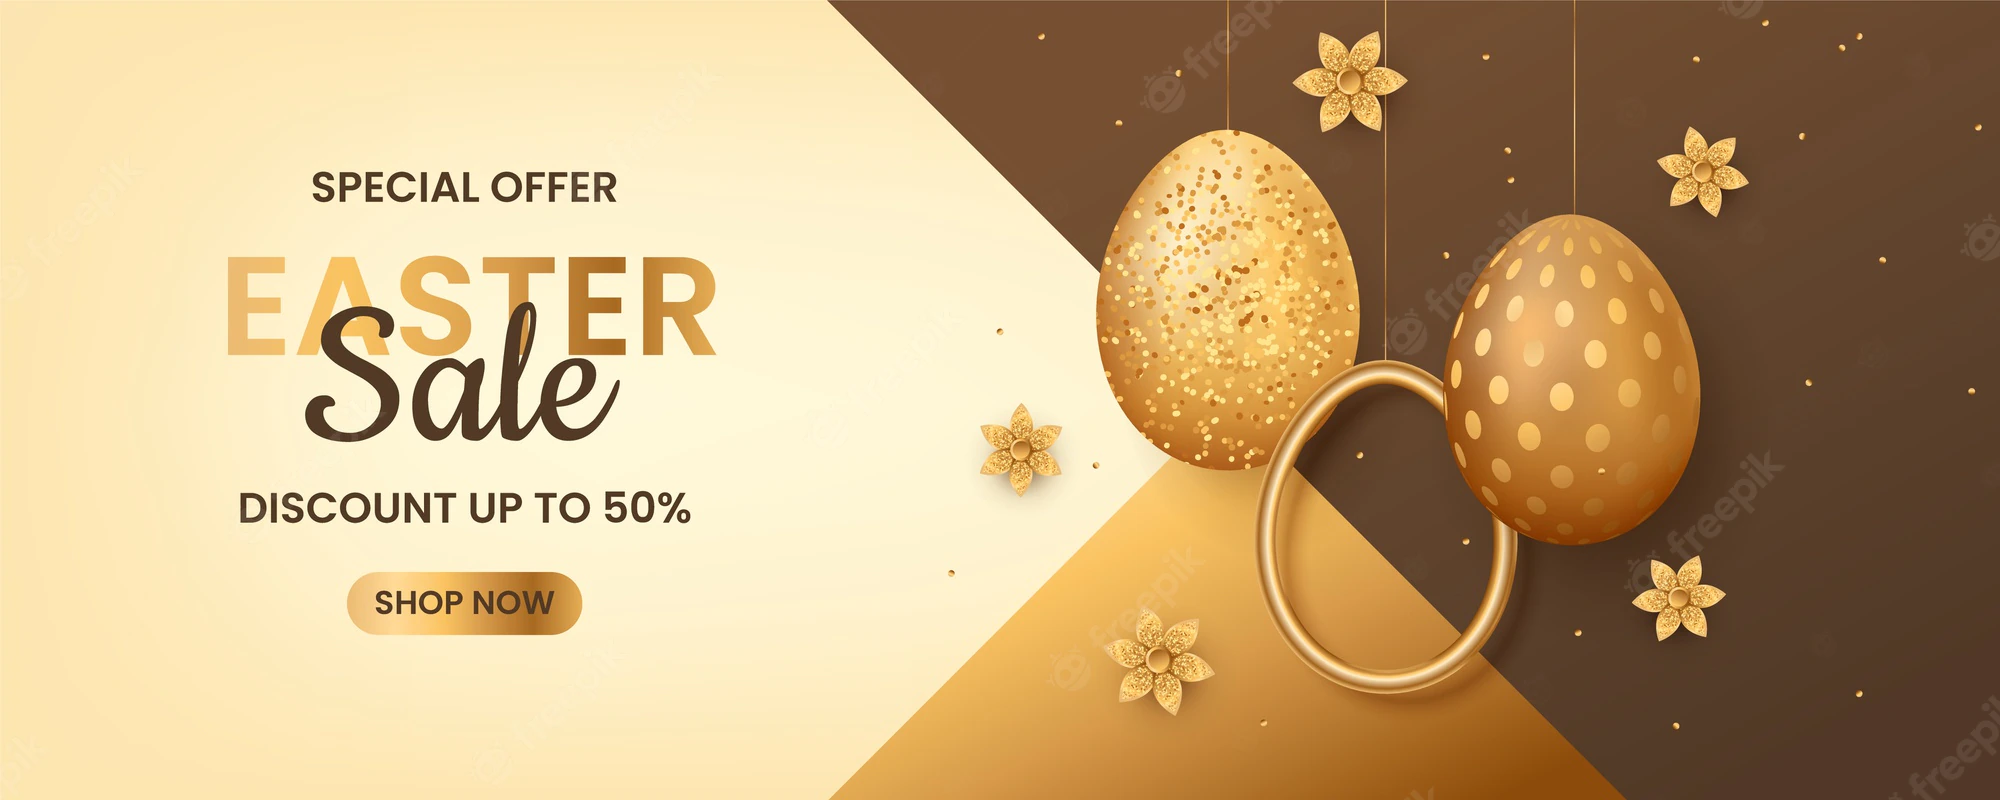 Realistic Easter Sale Horizontal Banner Template 52683 82757